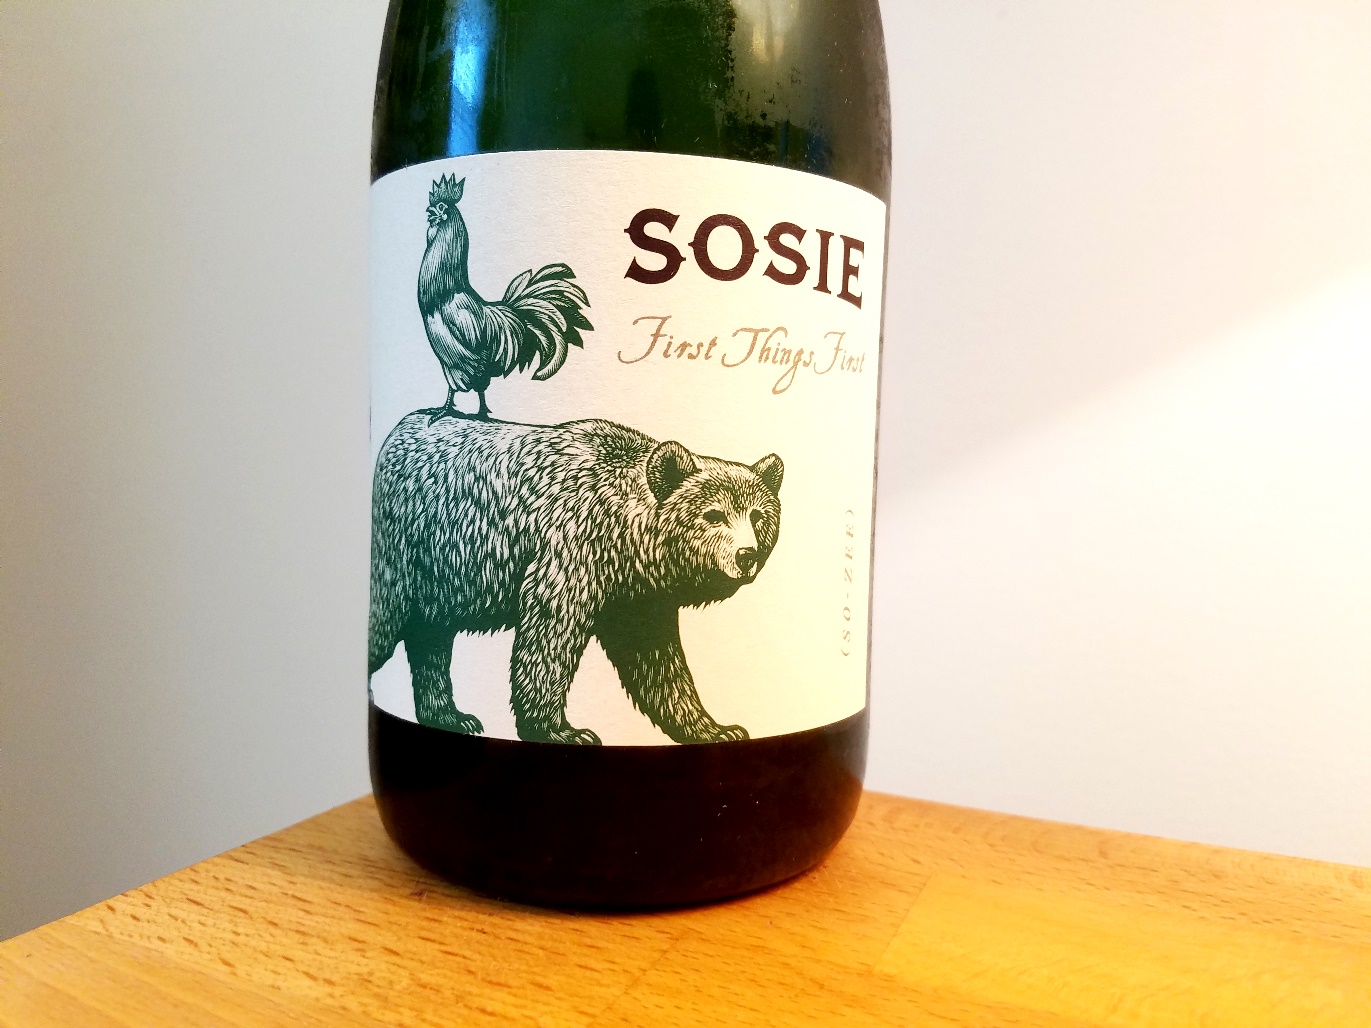 Sosie, First Things First Brut Nature 2018, Sonoma County, California, Wine Casual